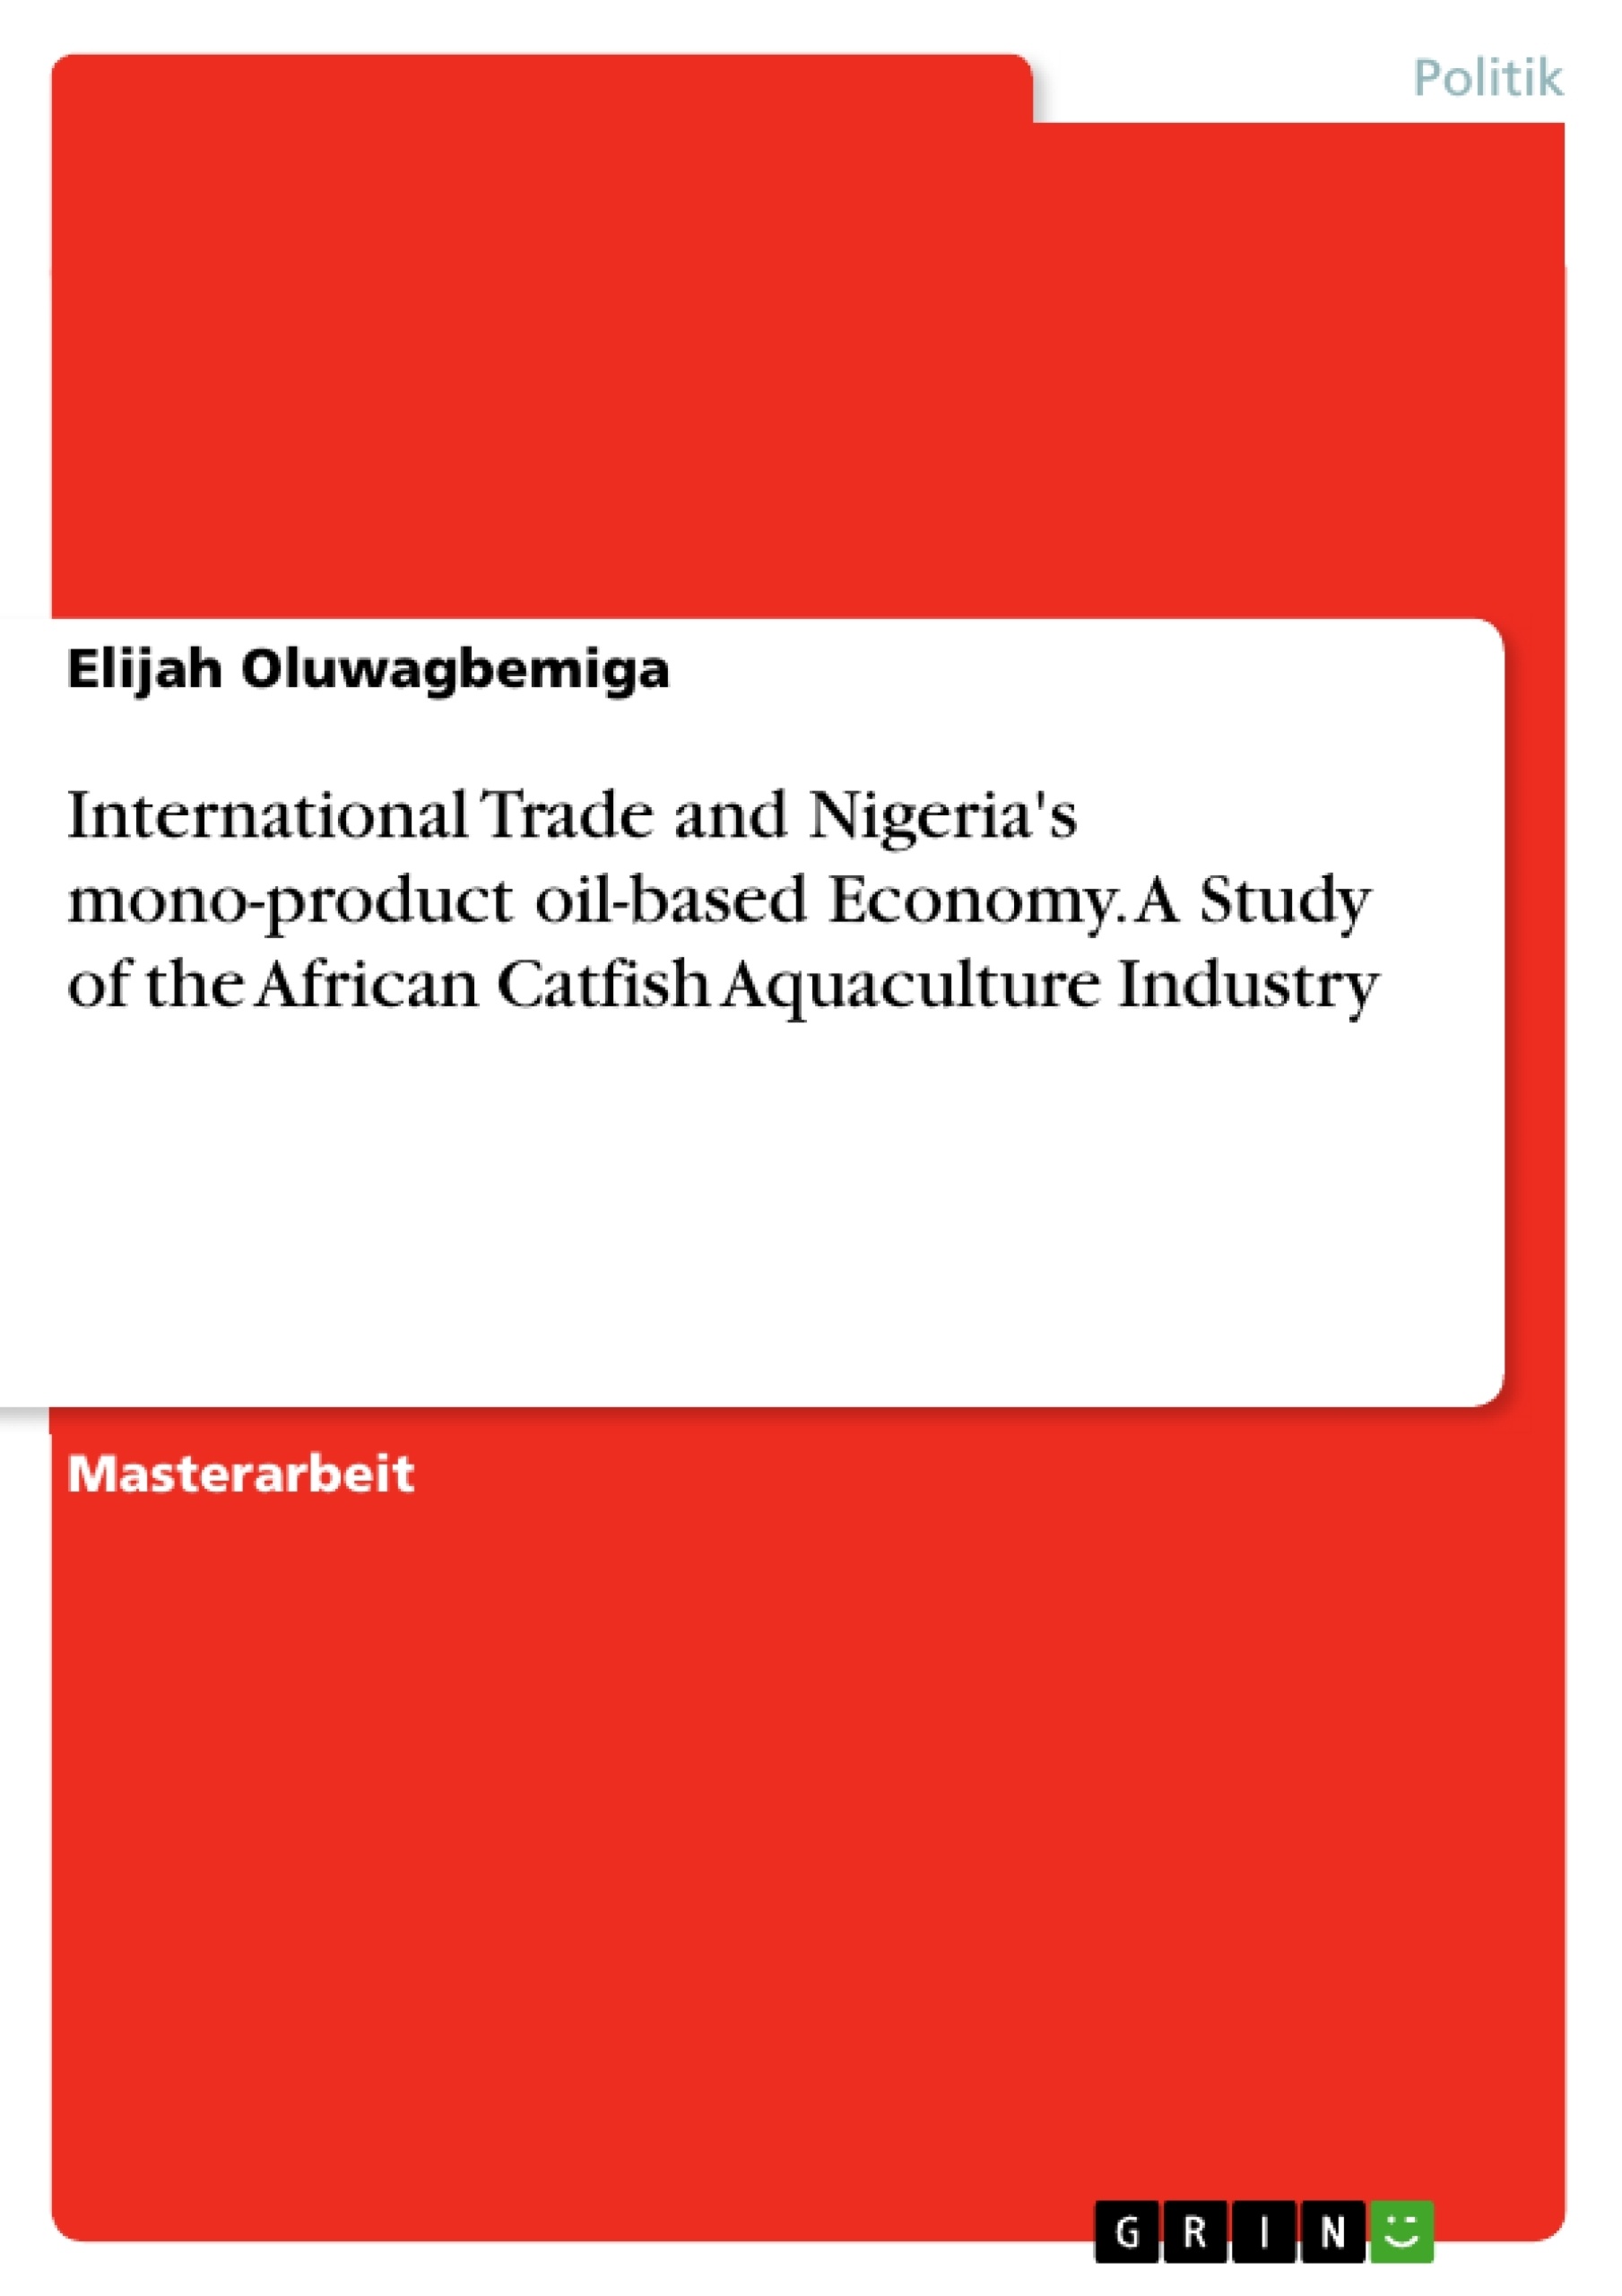 Título: International Trade and Nigeria's mono-product oil-based Economy. A Study of the African Catfish Aquaculture Industry